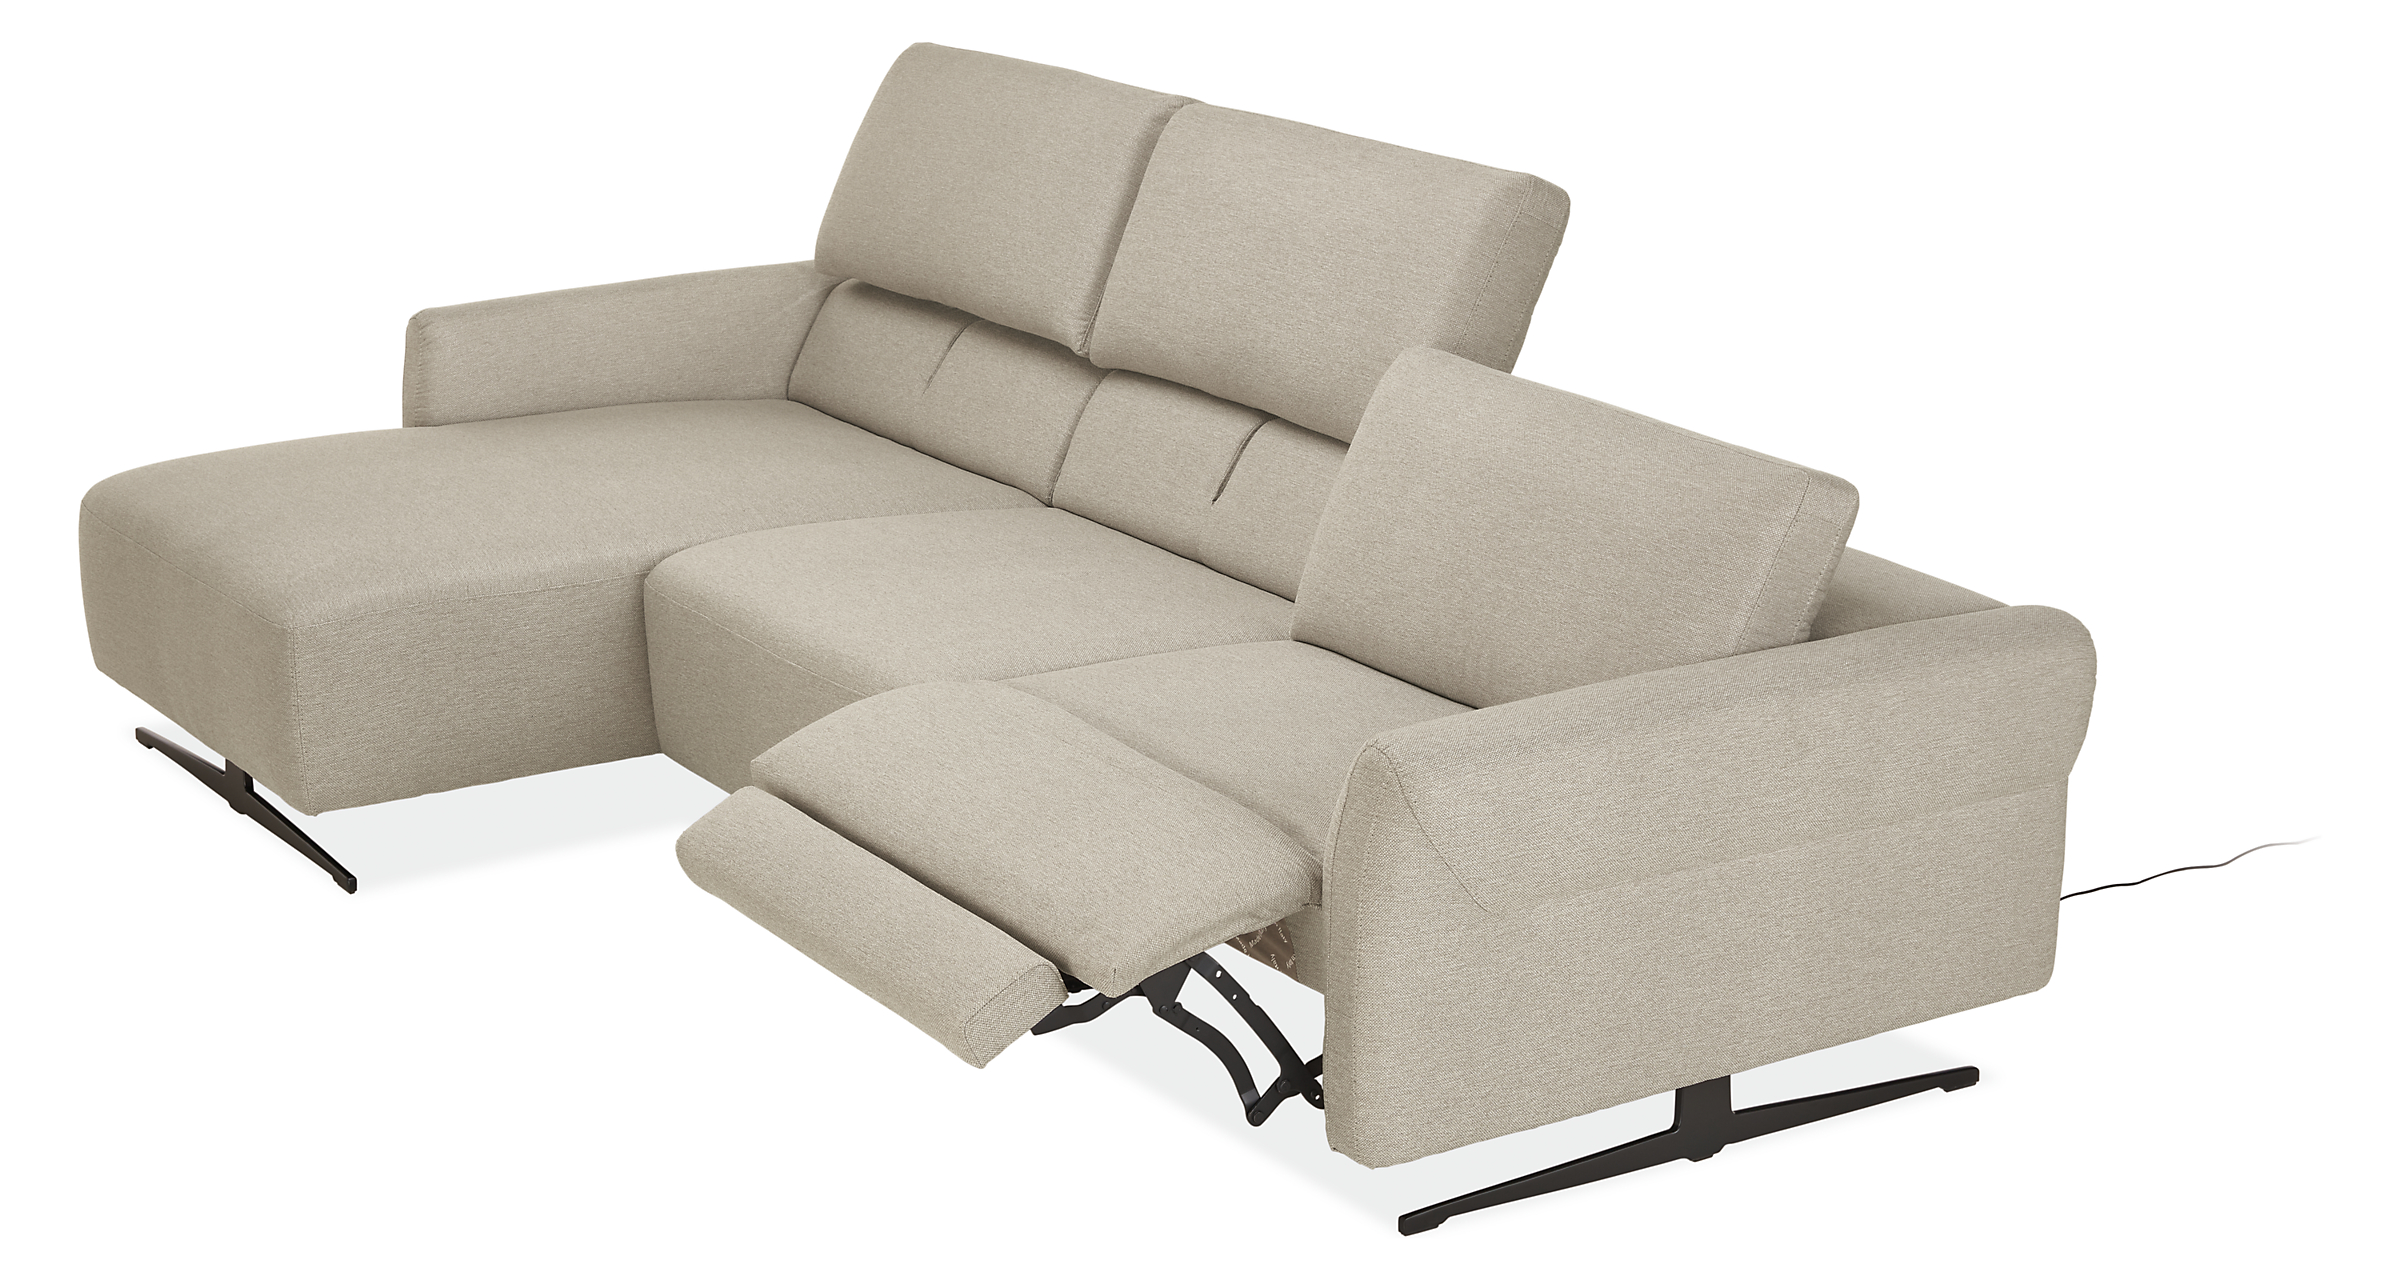 Detail of Vesna 3 piece sofa chaise with power in fabric shown in recline position with headrest raised on middle and chaise pieces.